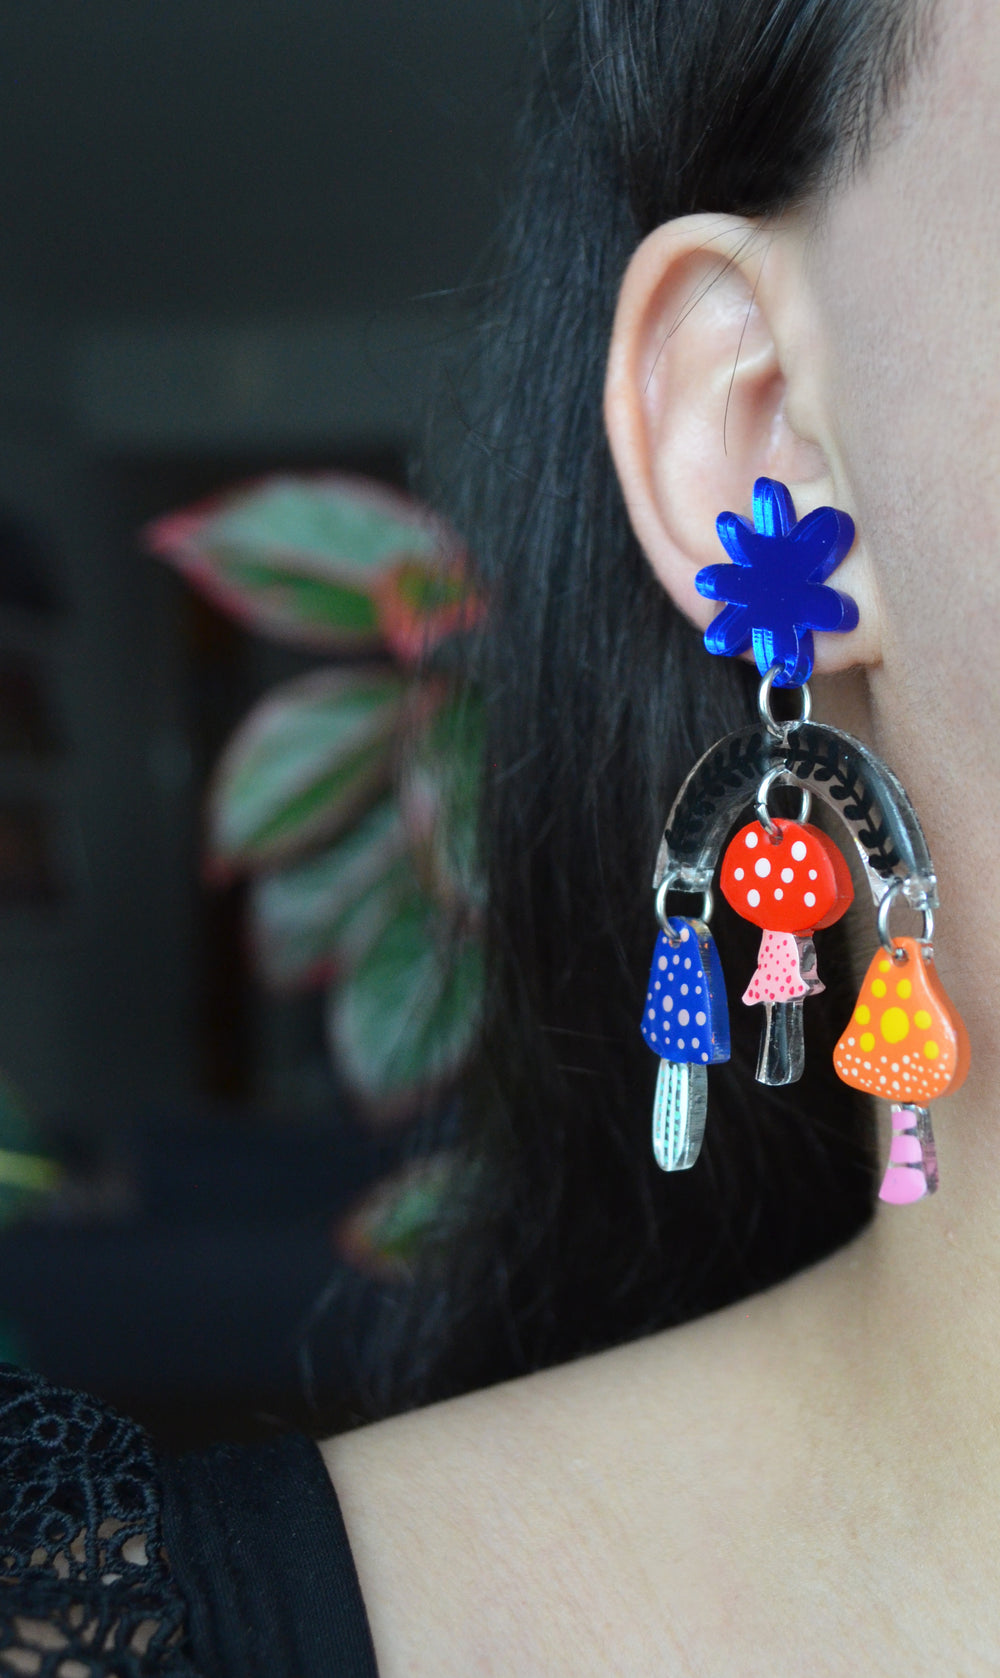 Forest Mushroom Earrings with Floral Details